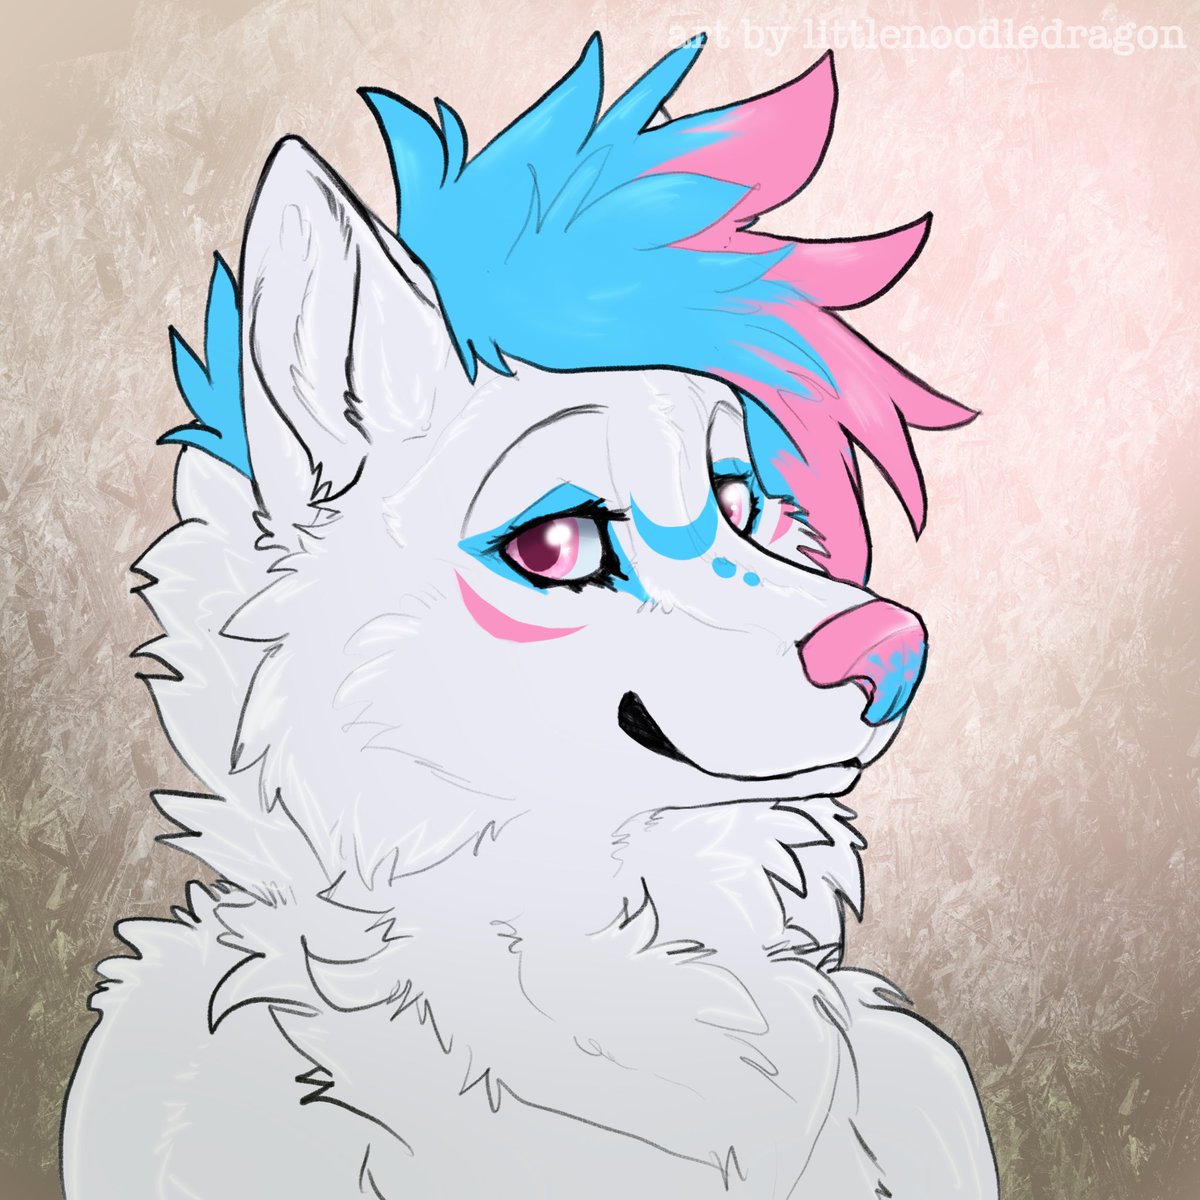 #NewProfilePic Shout out to @lilnoodledragon for their amazing work! I have no followers, but I can't not do this if I'm gonna rock it >:3